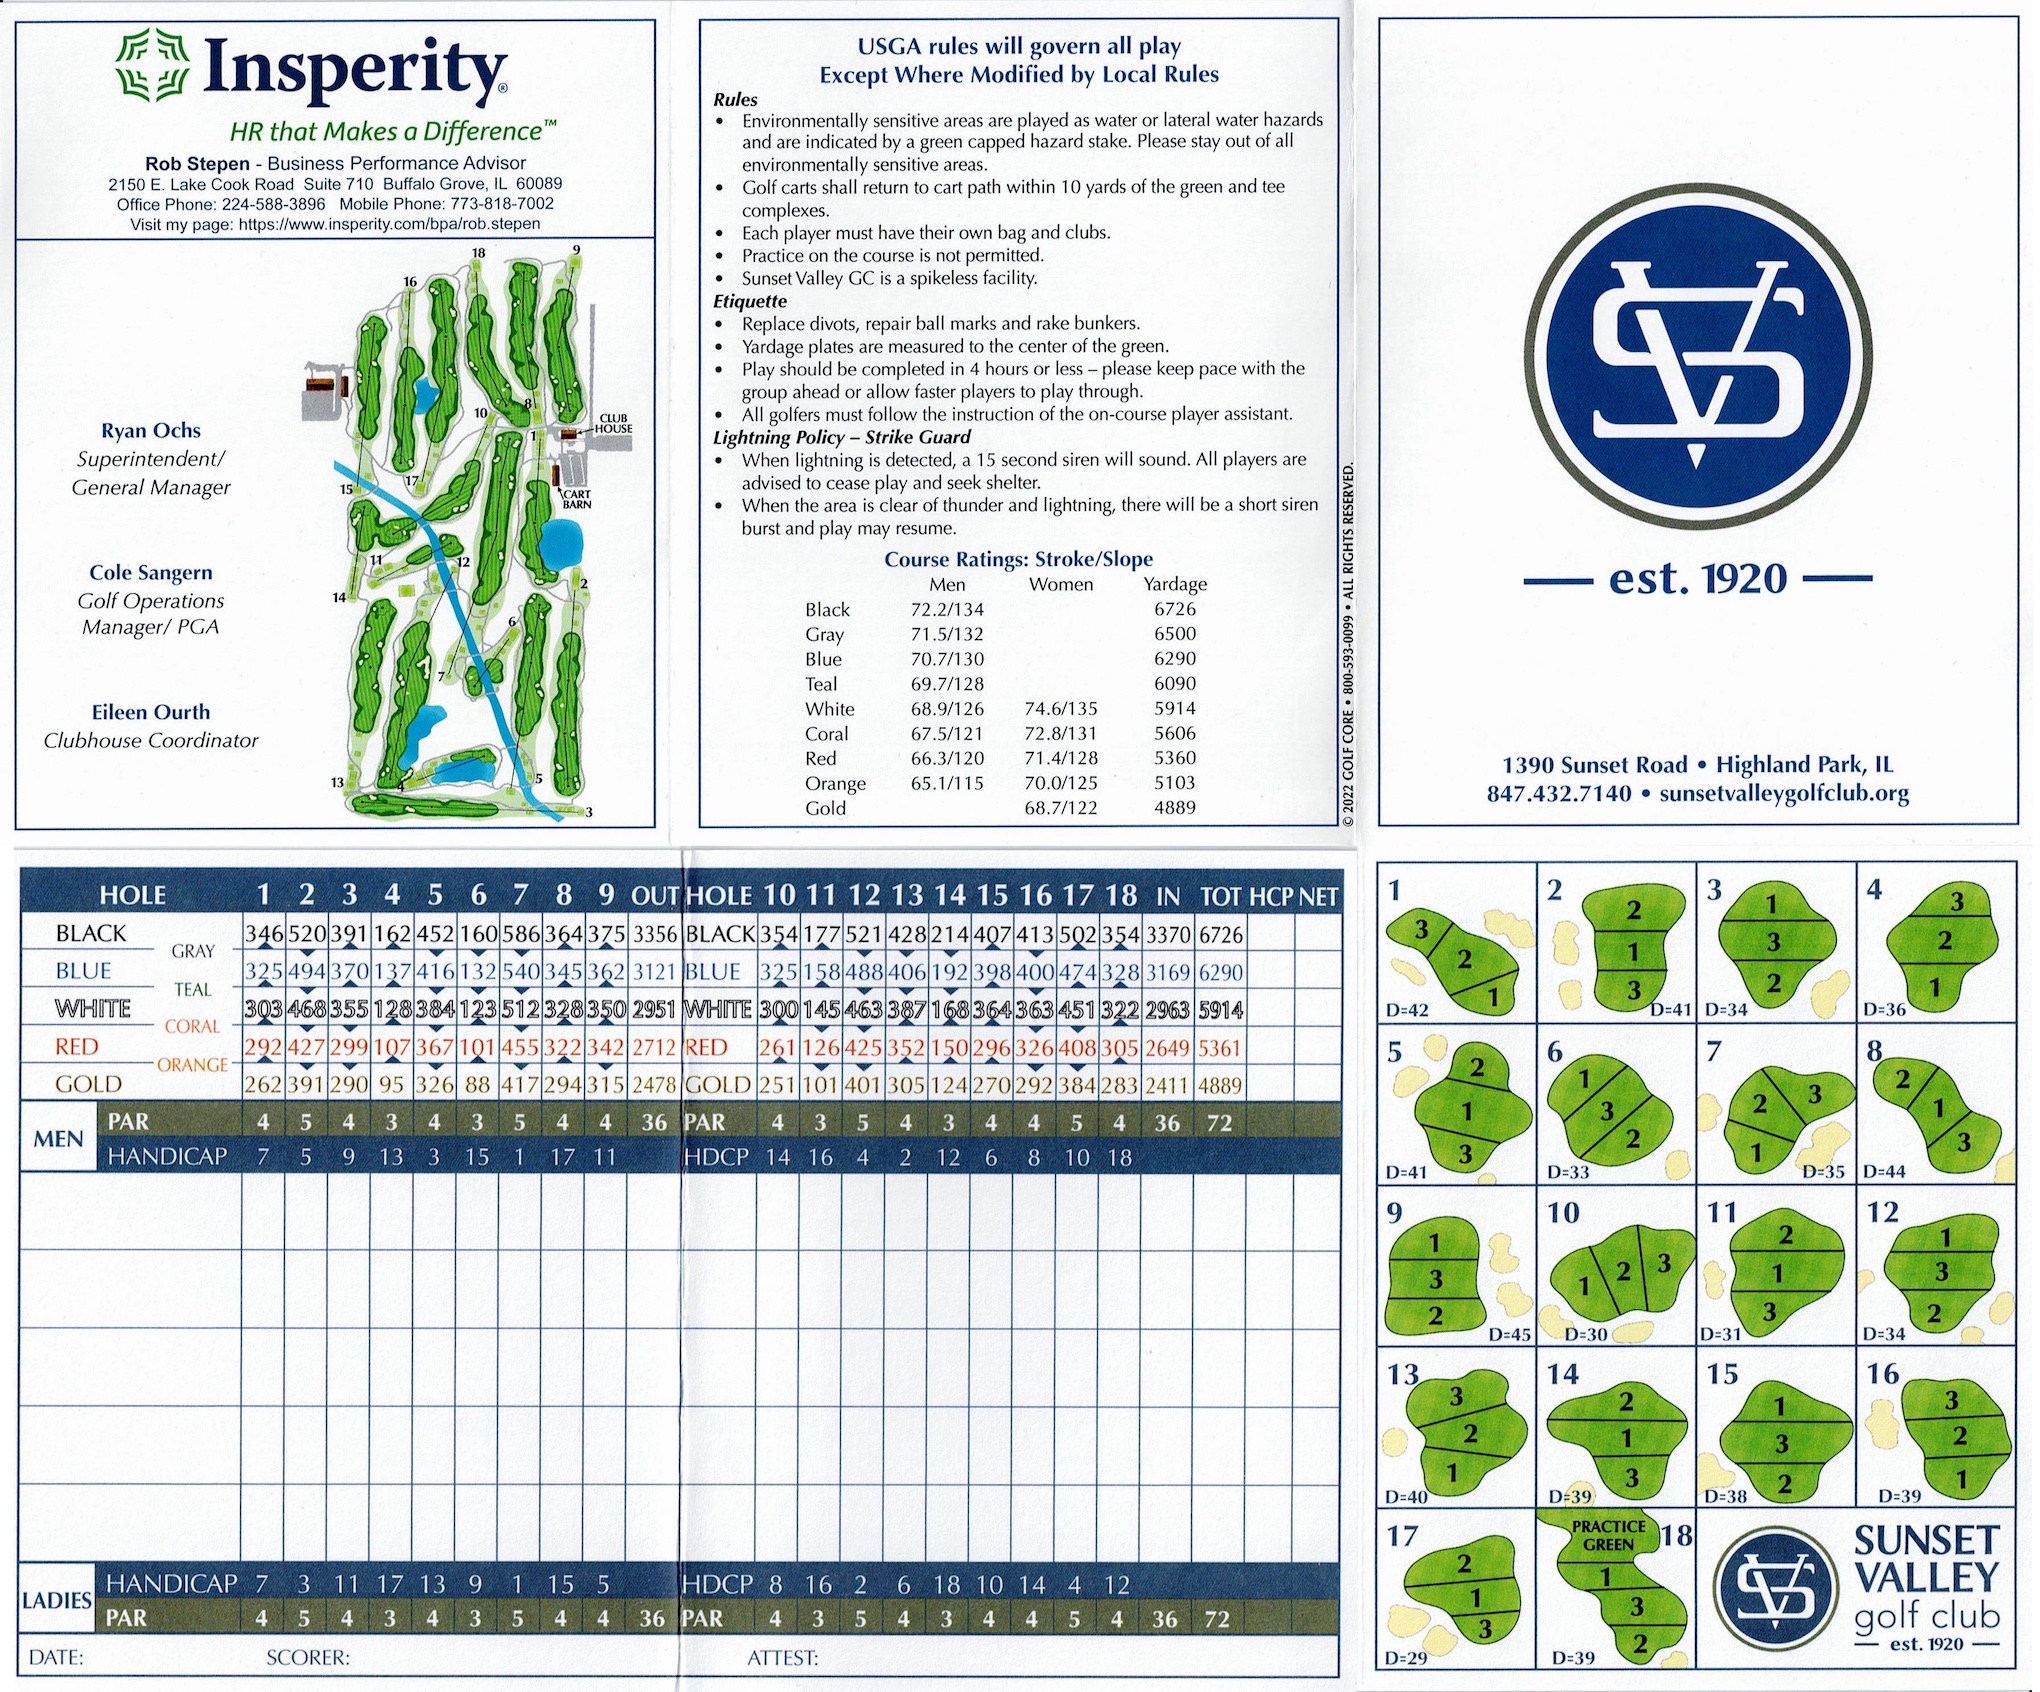 Scan of the scorecard from Sunset Valley Golf Club in Highland Park, Illinois. 